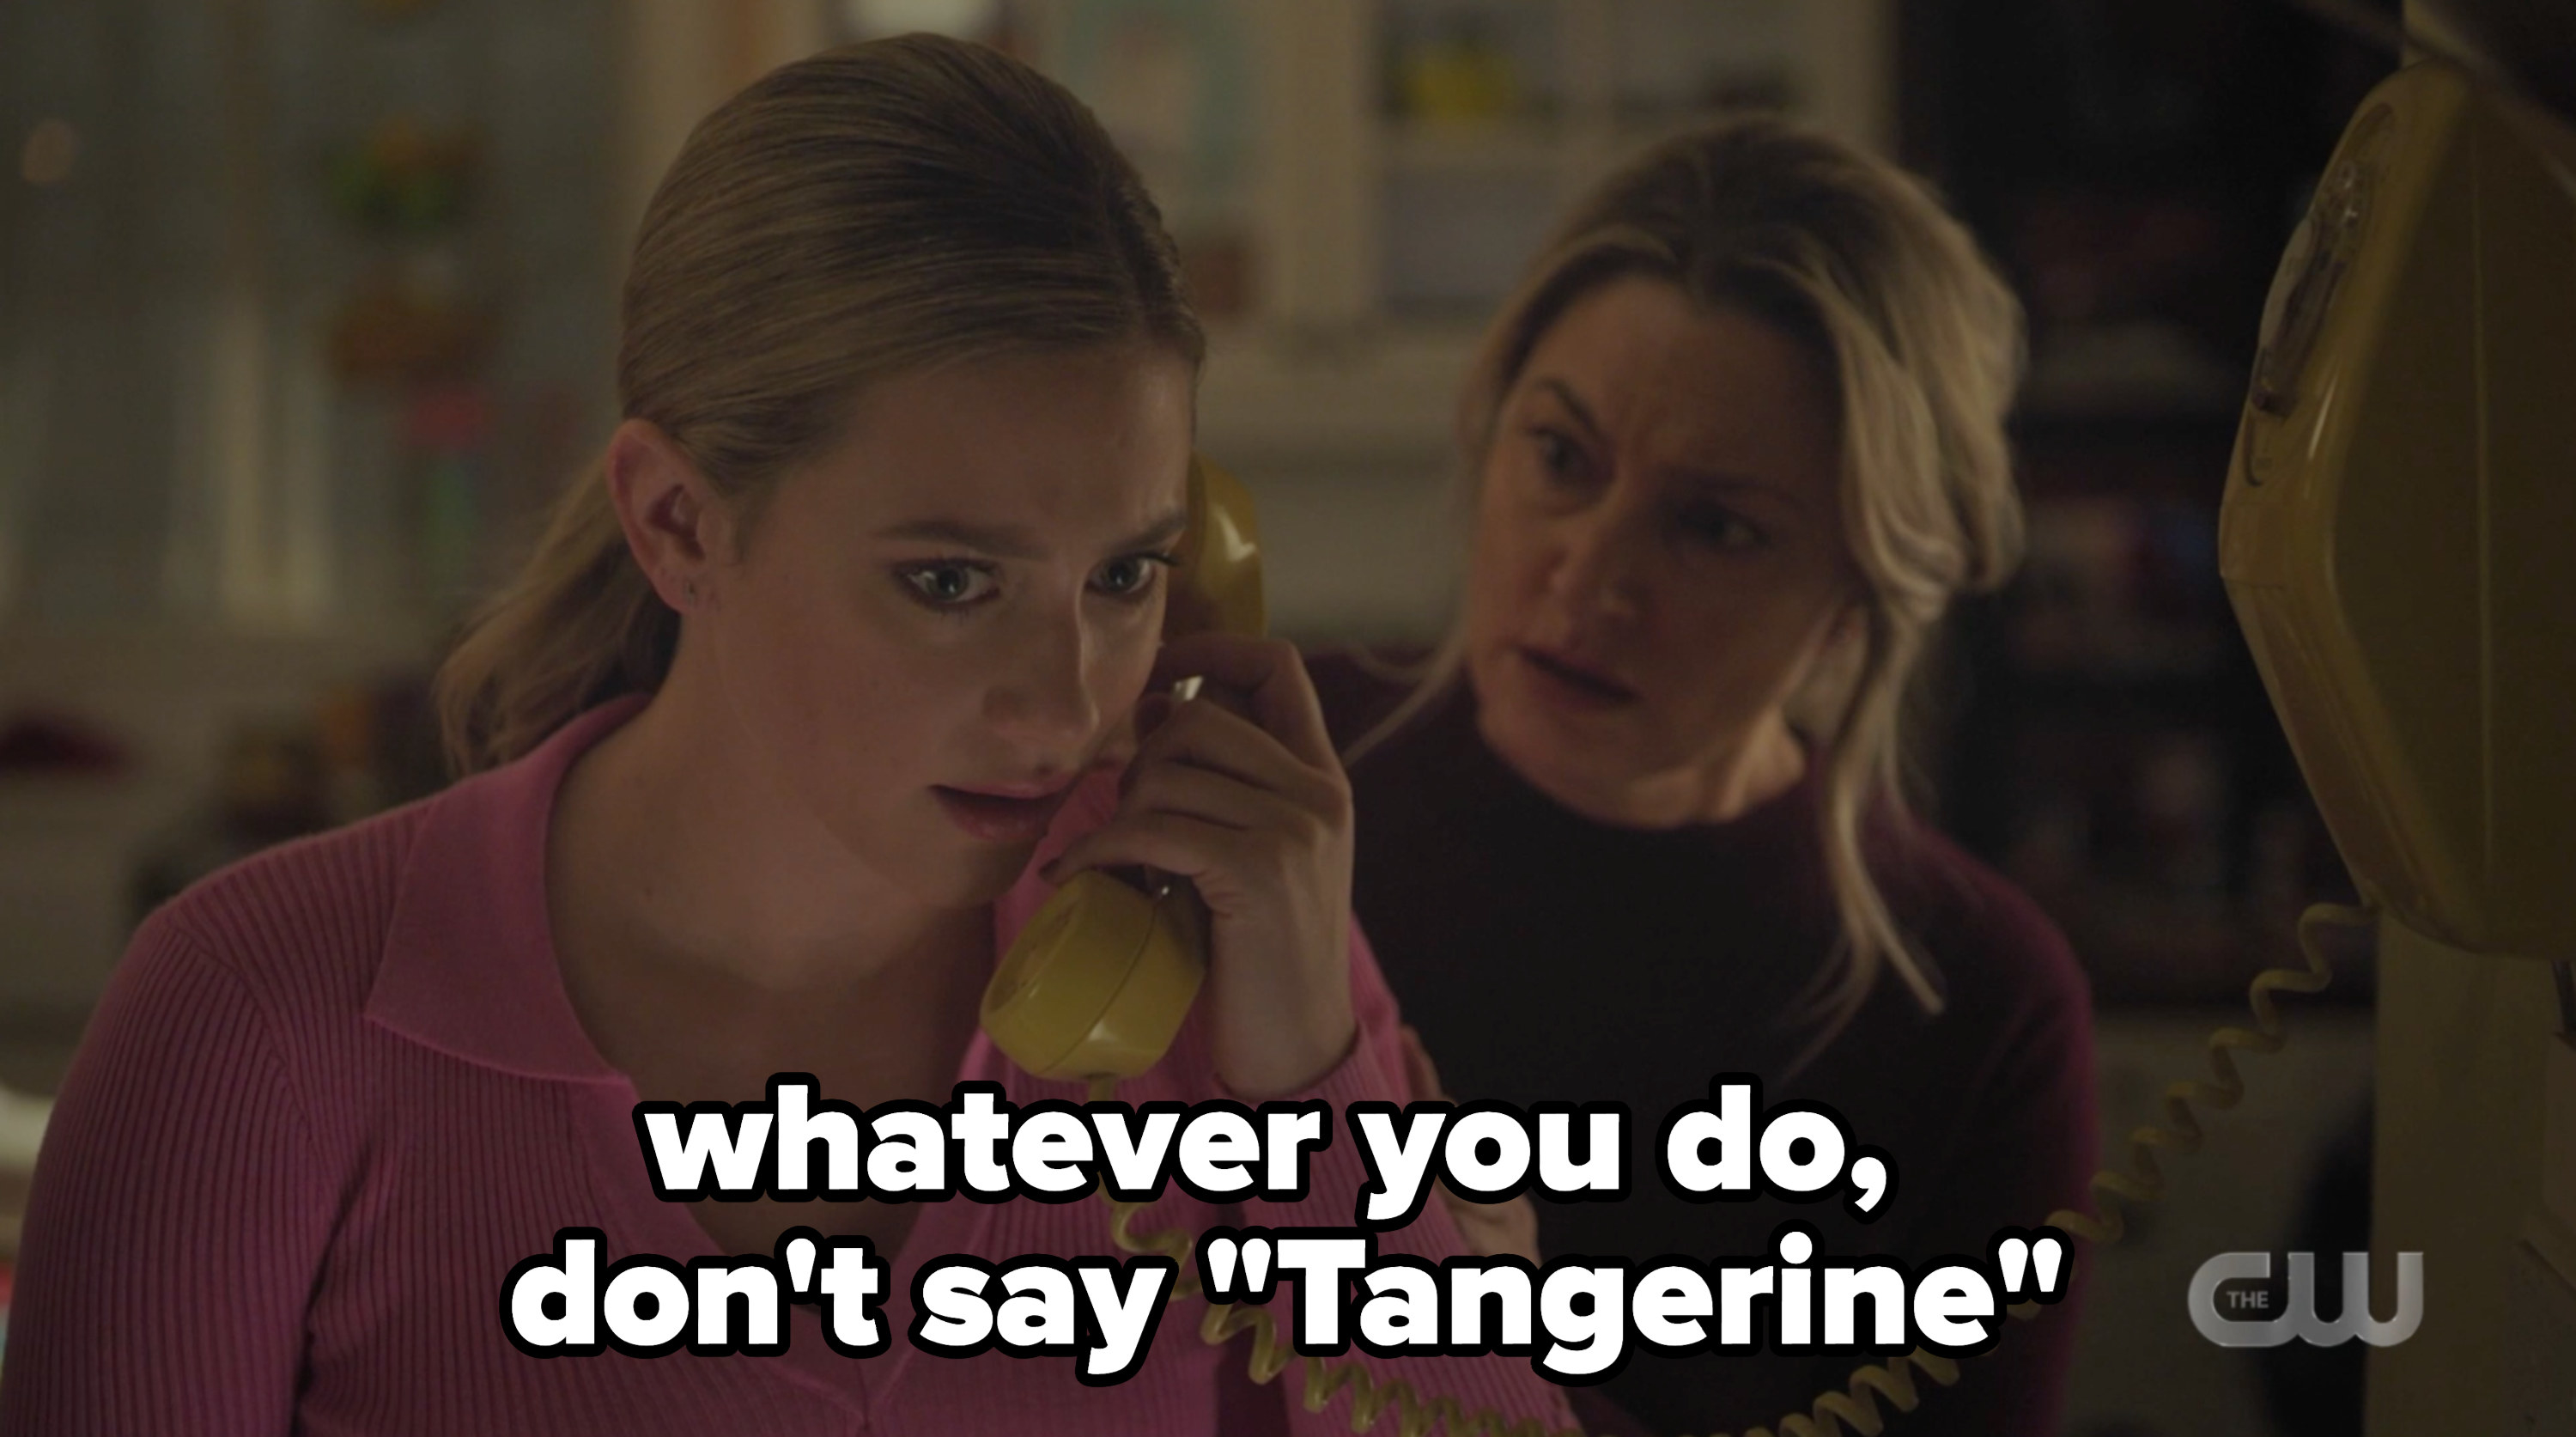 Betty on the phone with the caption &quot;whatever you do, don&#x27;t say tangerine&quot;